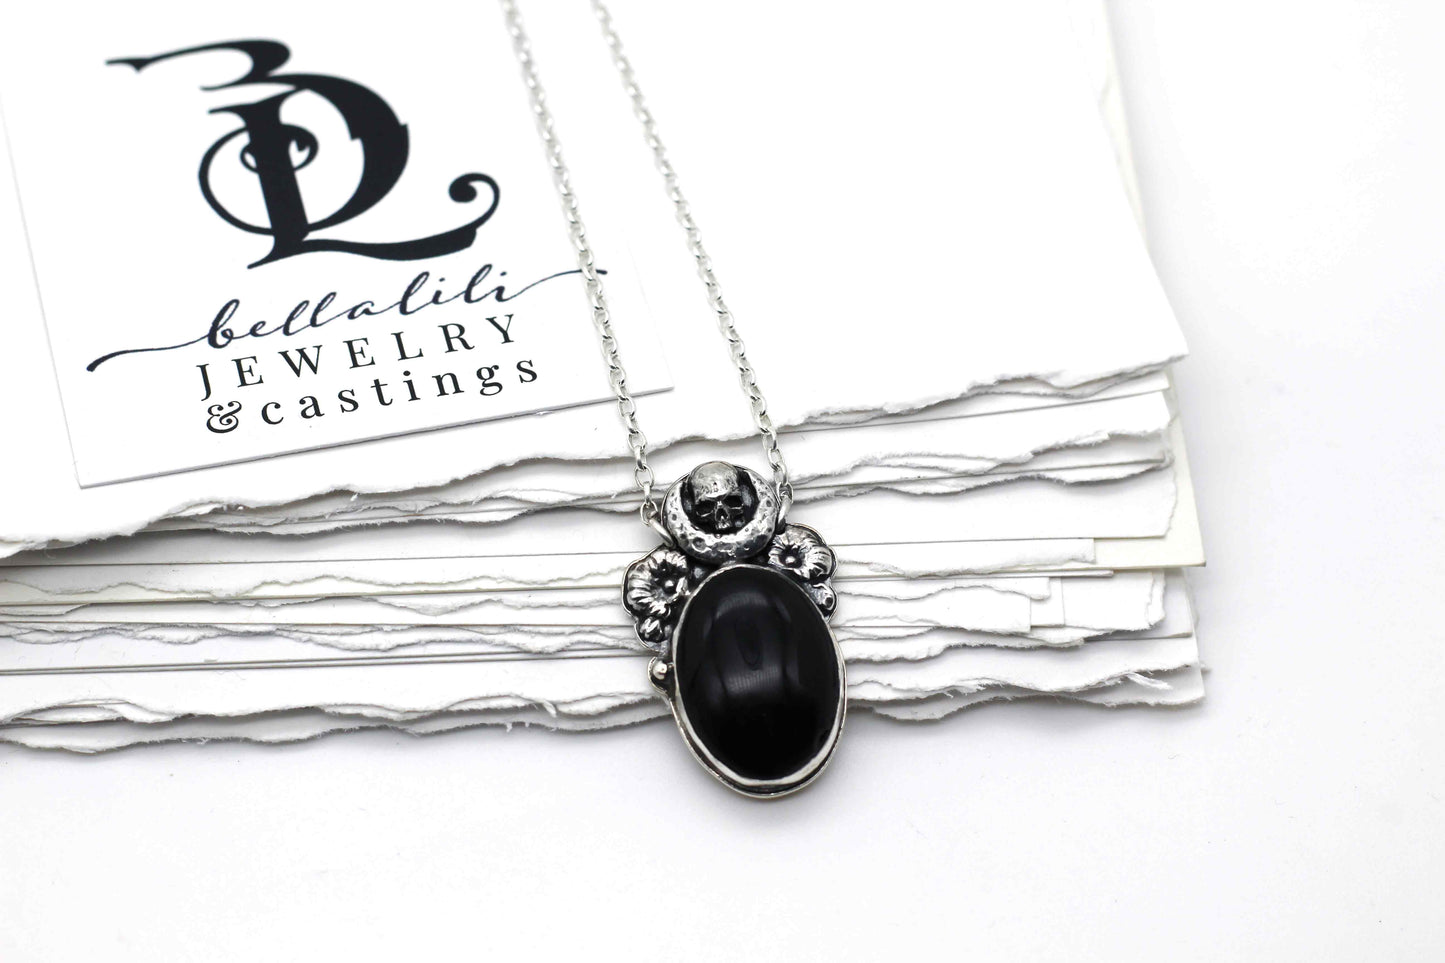 Dark of a Moon, Black Onyx and Skull moon necklace